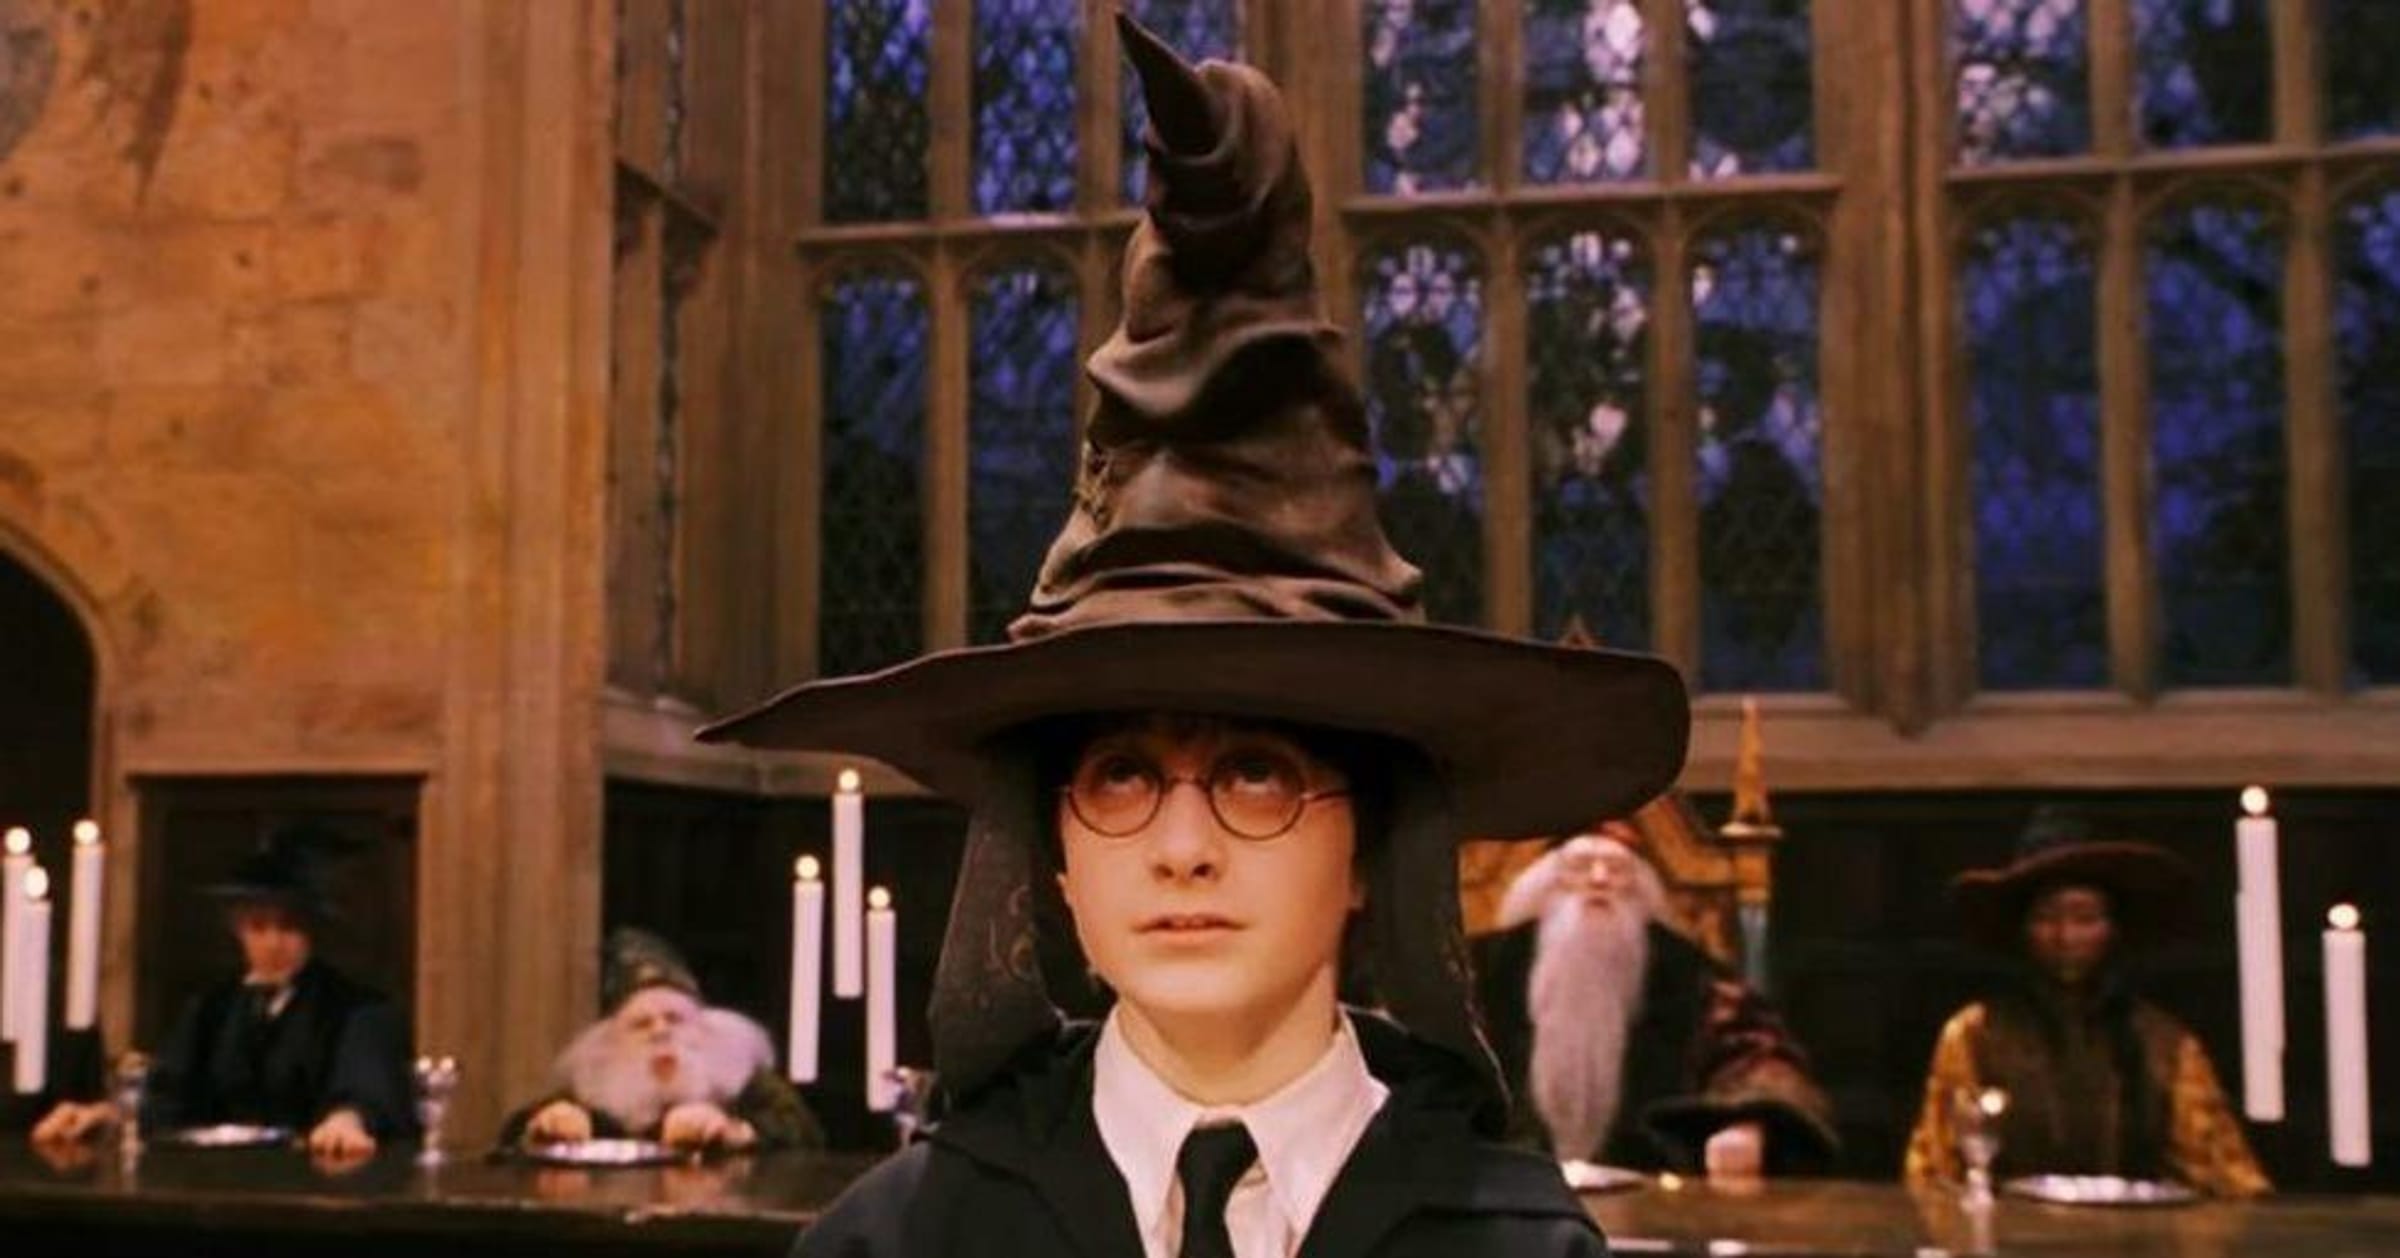 Test your knowledge of the Hogwarts Sorting Hat!